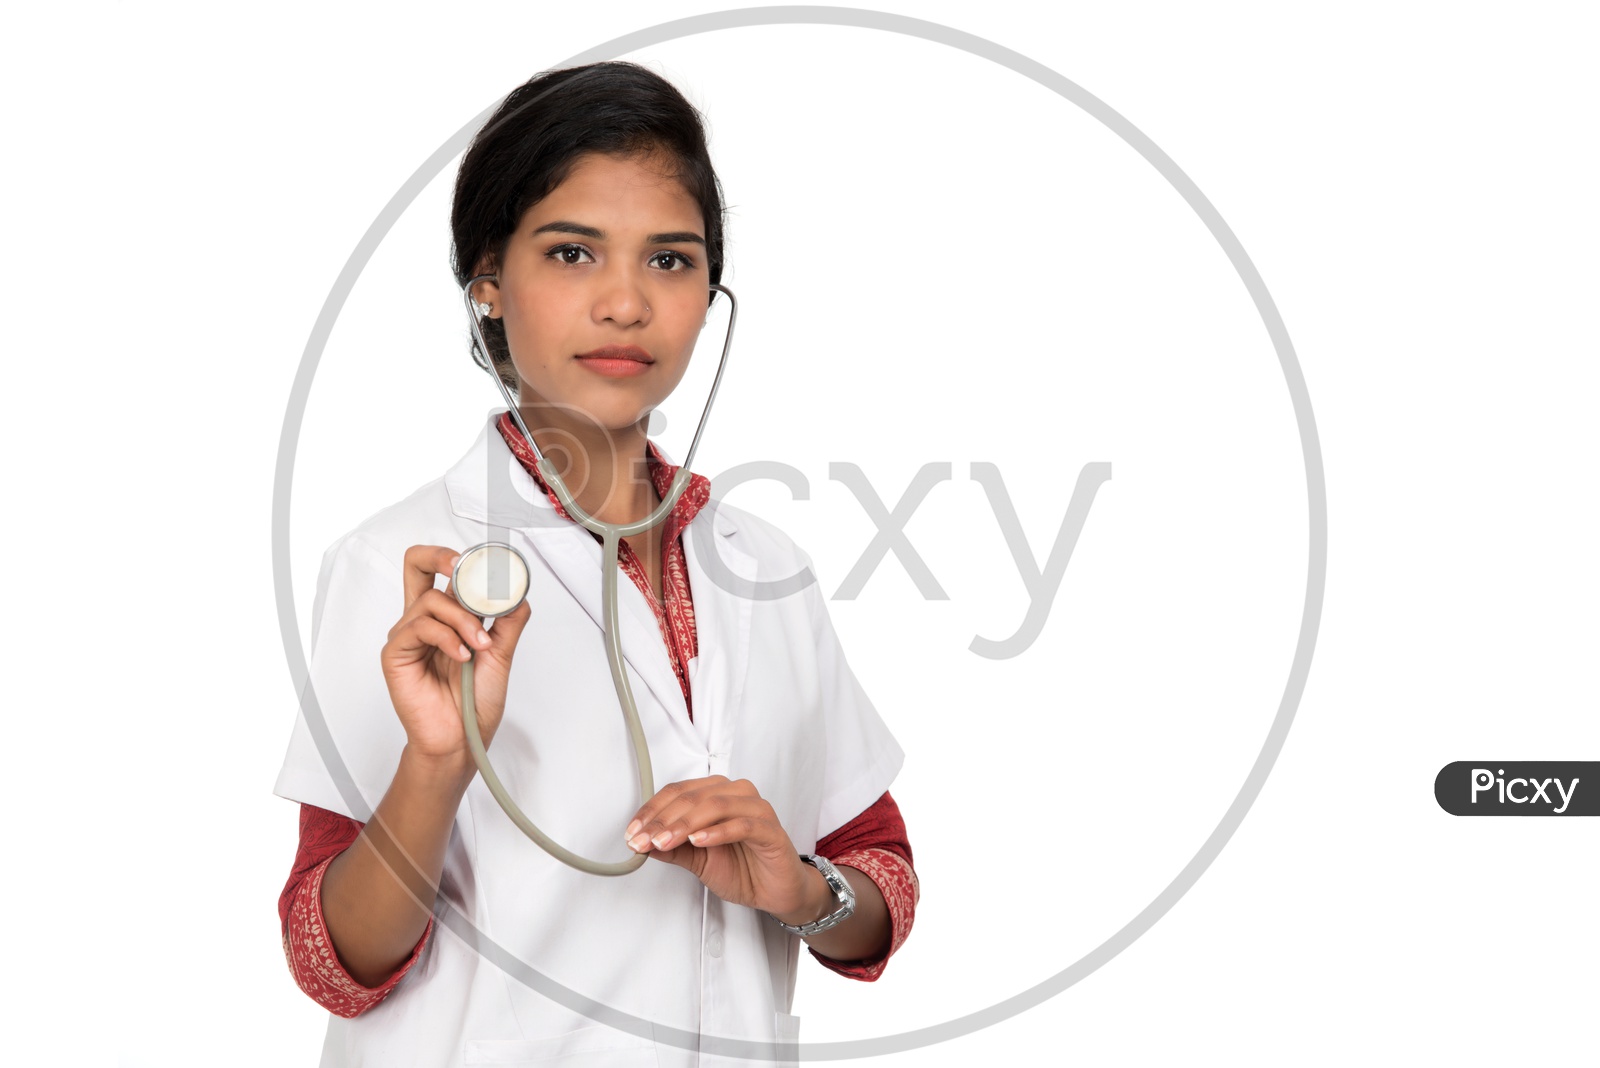 Portrait Of a Young Indian Woman With Stethoscope over Neck On an Isolated White Background